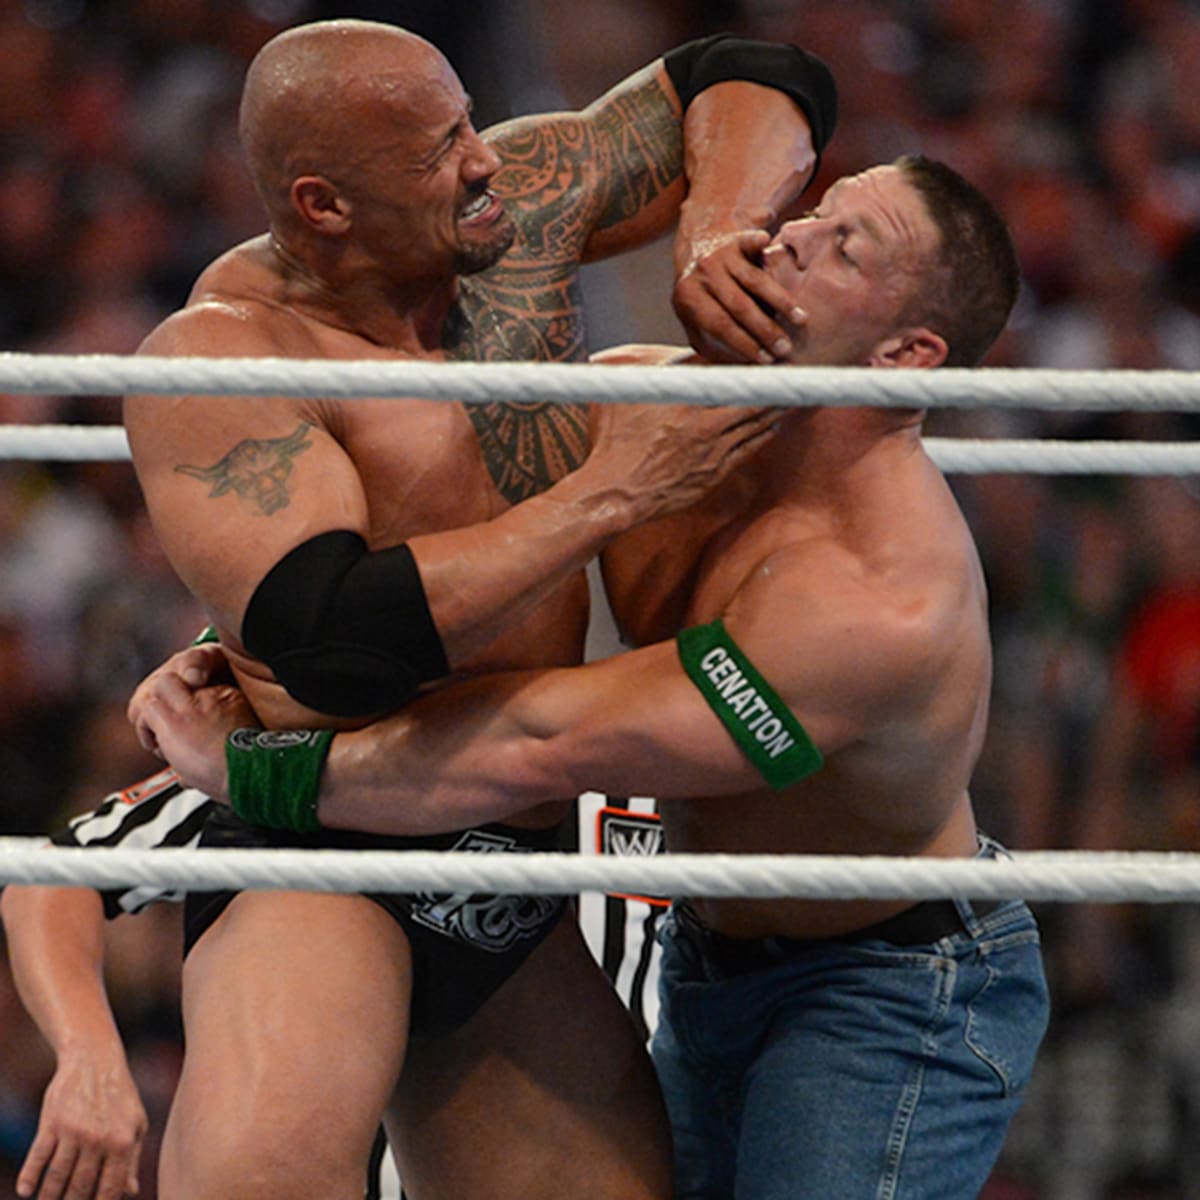 Harvard to offer case study this fall on WWE, The Rock, LeBron James - Sports Illustrated